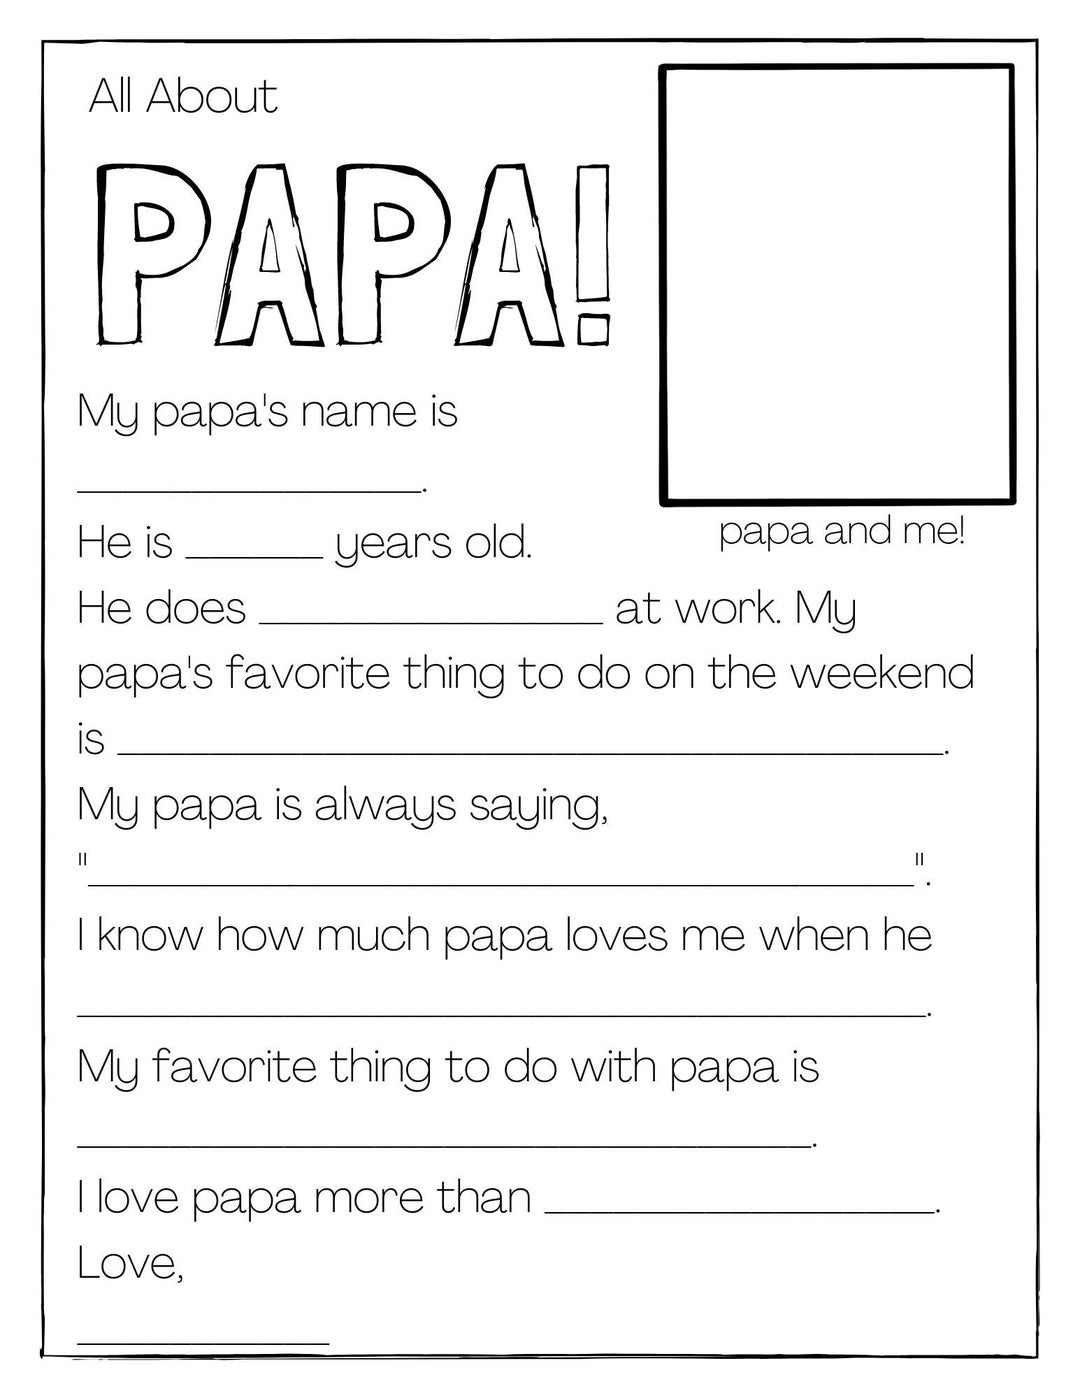 all-about-my-papa-printable-fathers-day-gift-from-kids-etsy